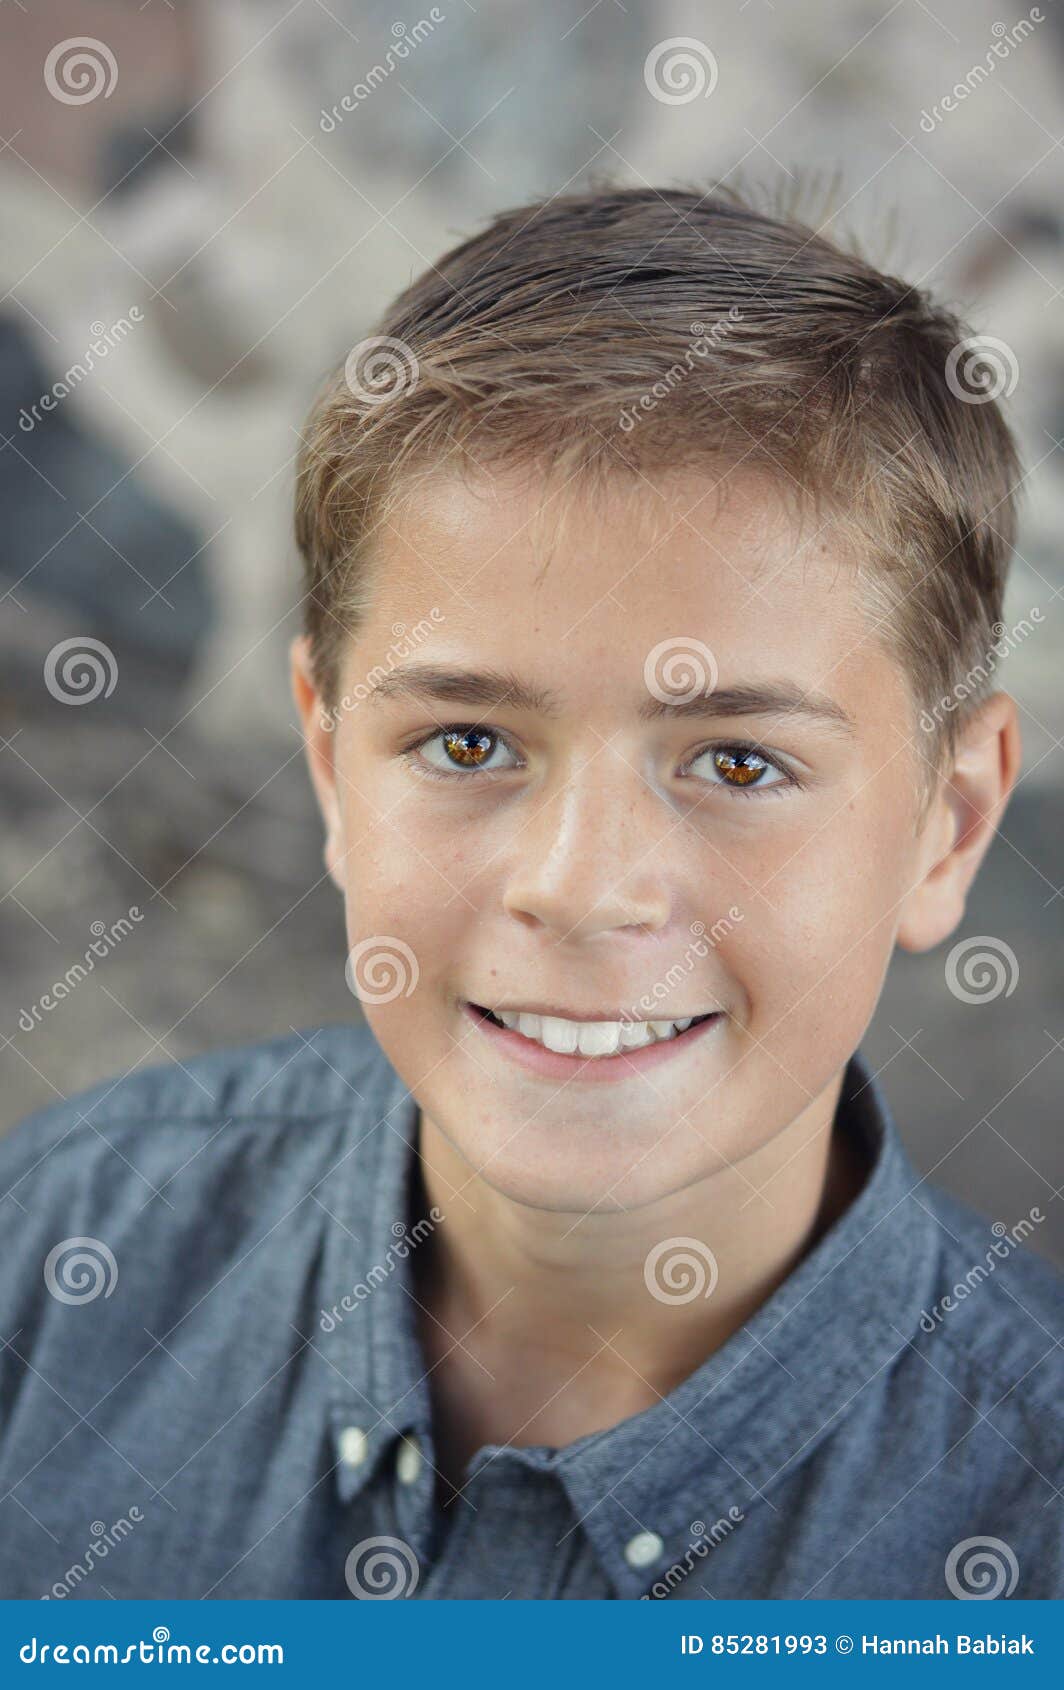 Blond Haired Brown Eyed Boy Stock Image Image Of Handsome Brown